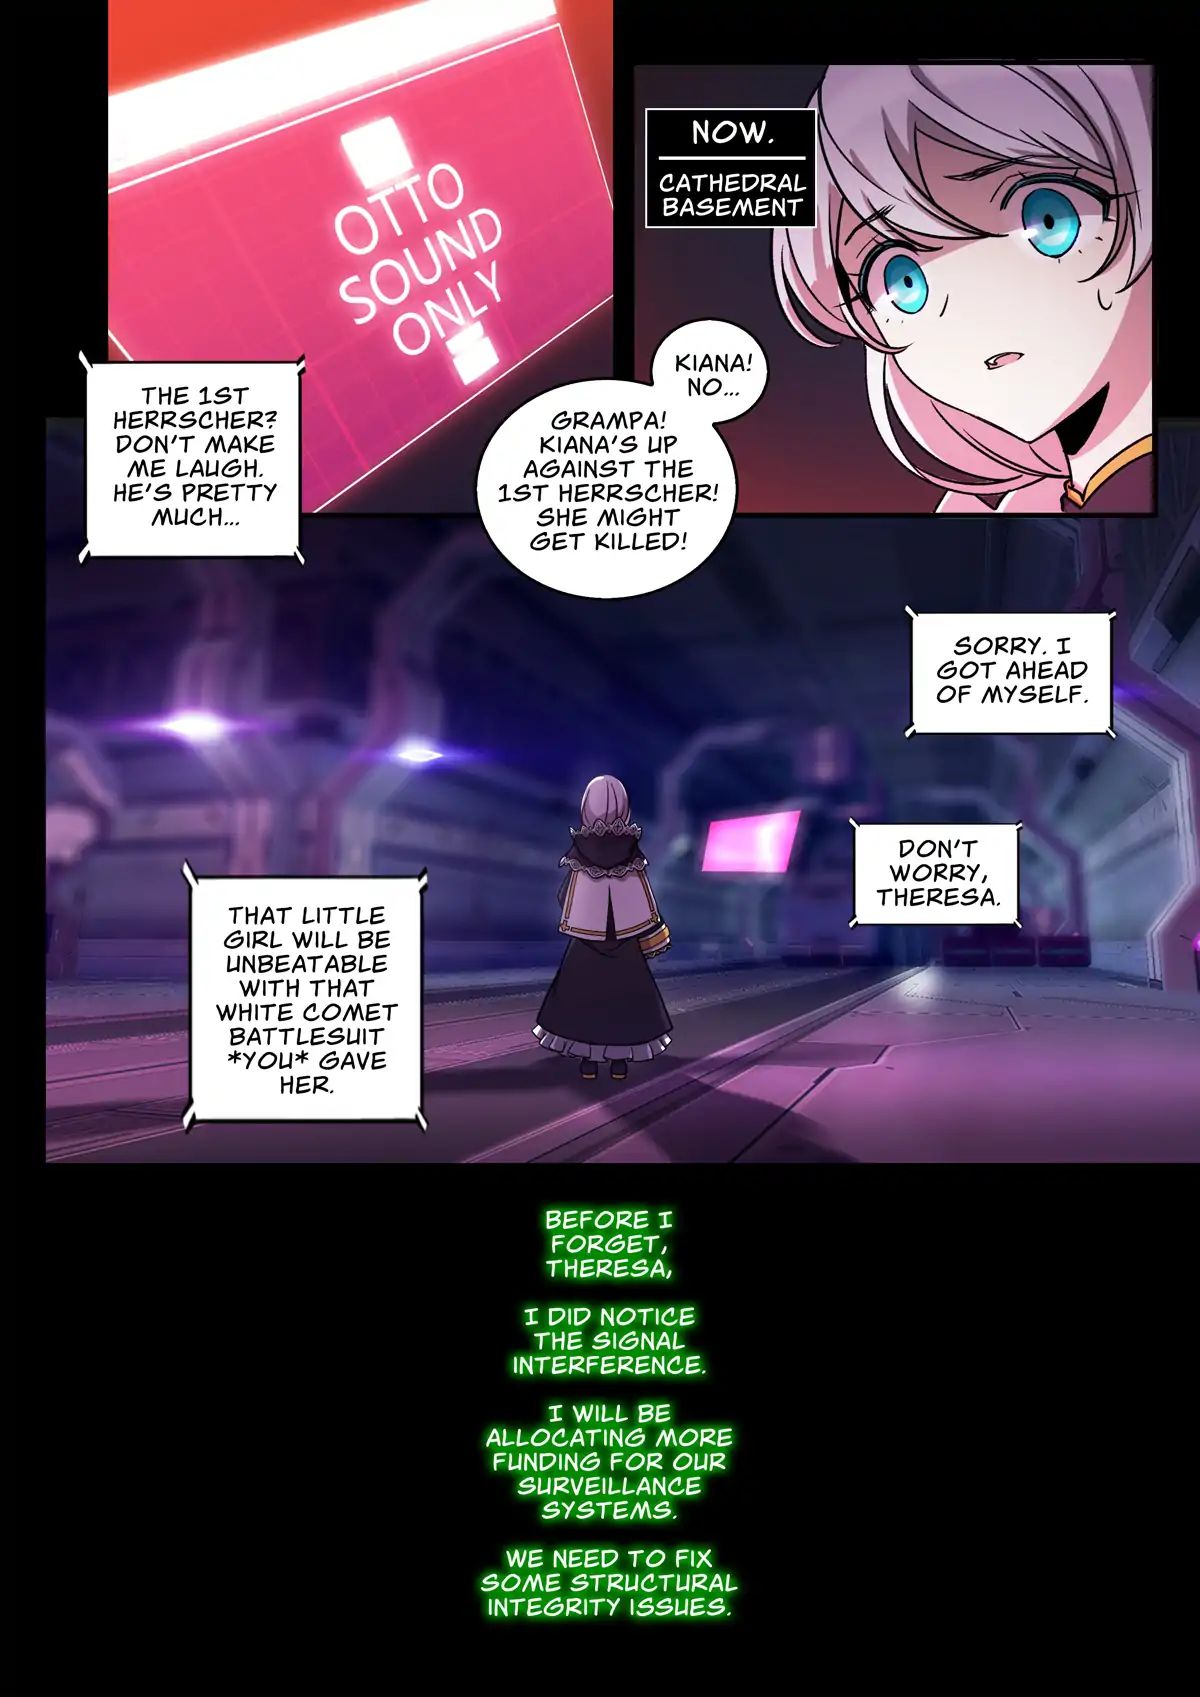 Honkai Impact 3 Vol.5 Chapter 38: Fairytale They Believe